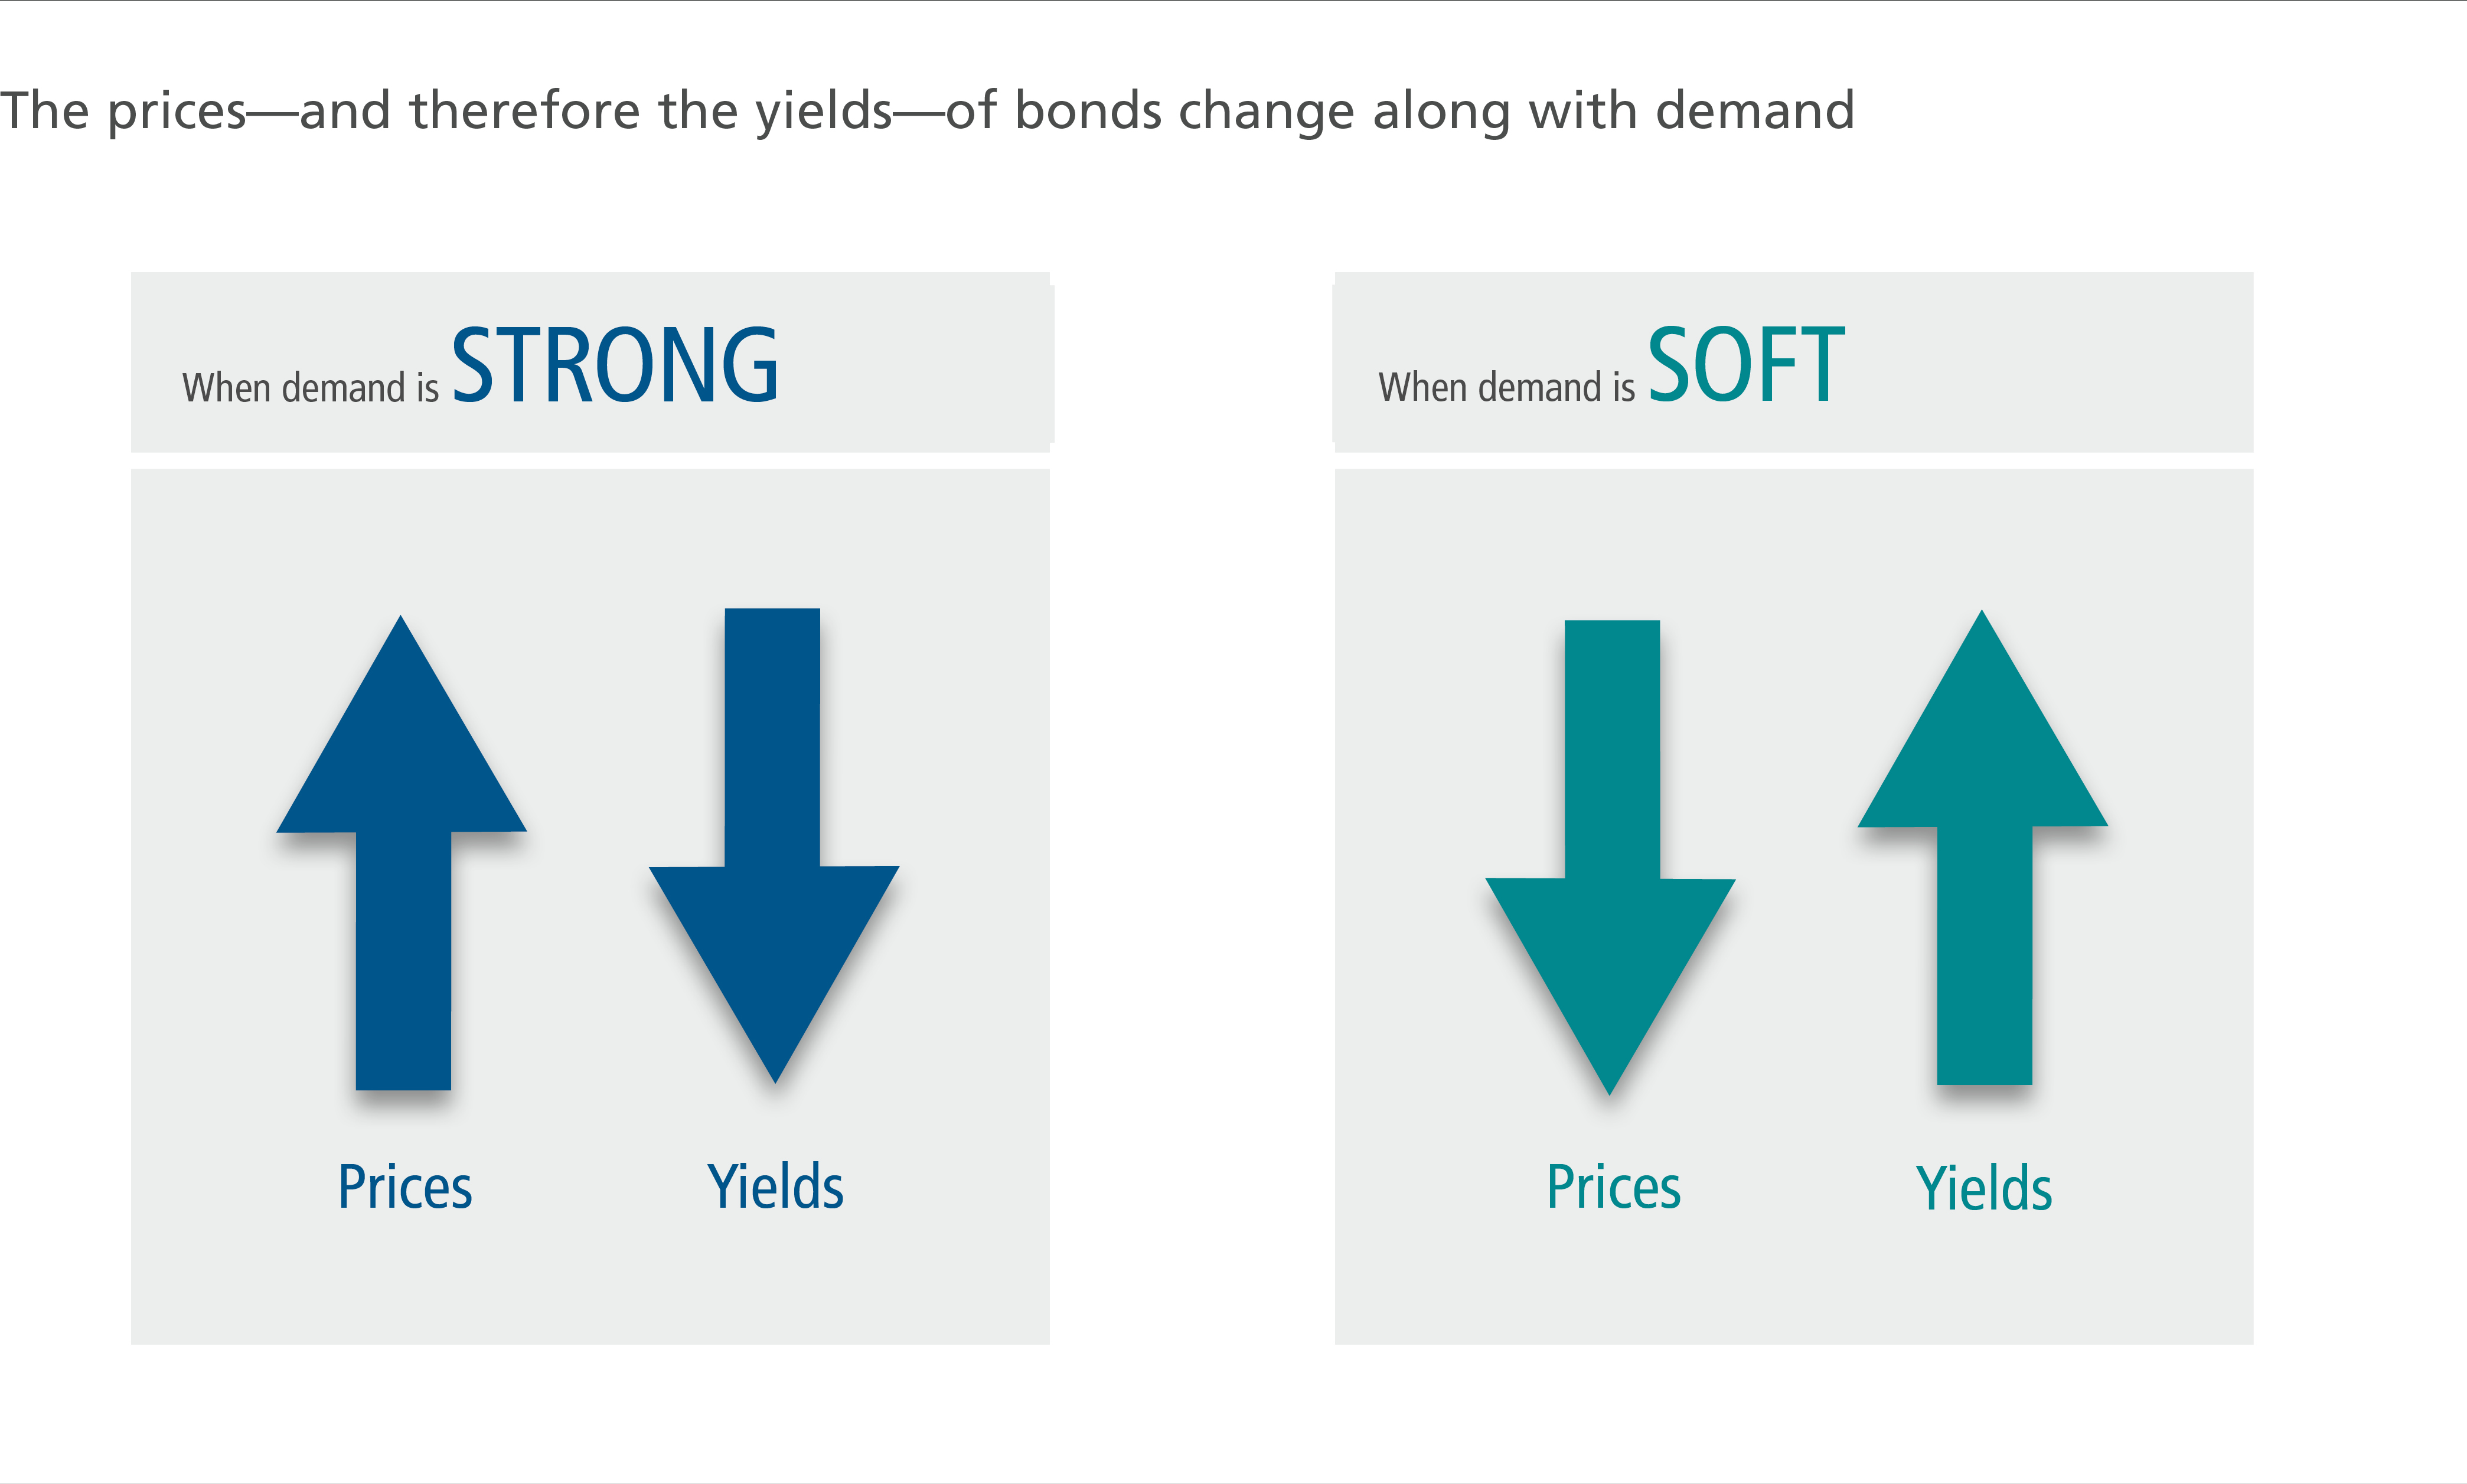 The prices and yields of bonds change along with demand